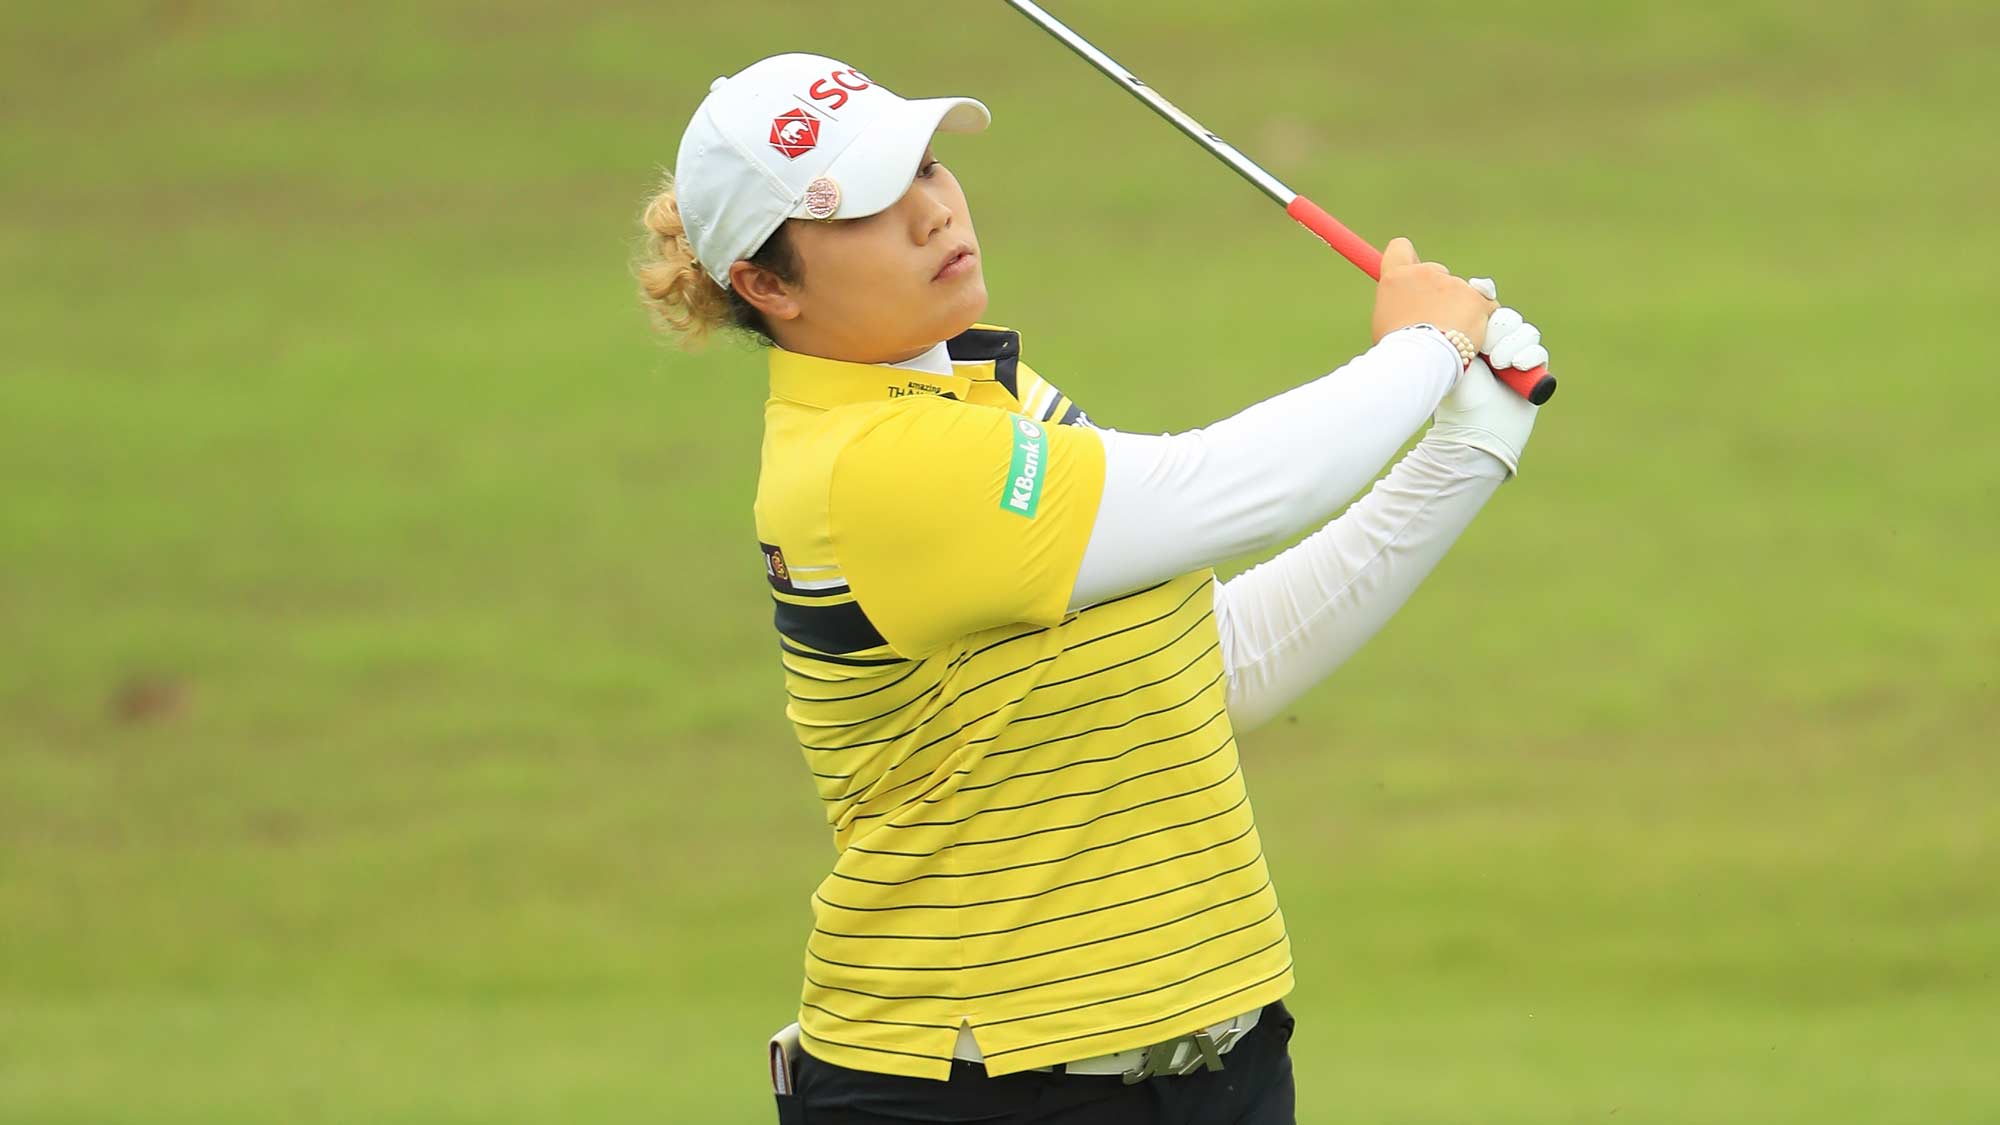 Ariya Jutanugarn of Thailand plays her second shot on the first hole during the first round of the HSBC Women's World Championship at Sentosa Golf Club on February 28, 2019 in Singapore. 